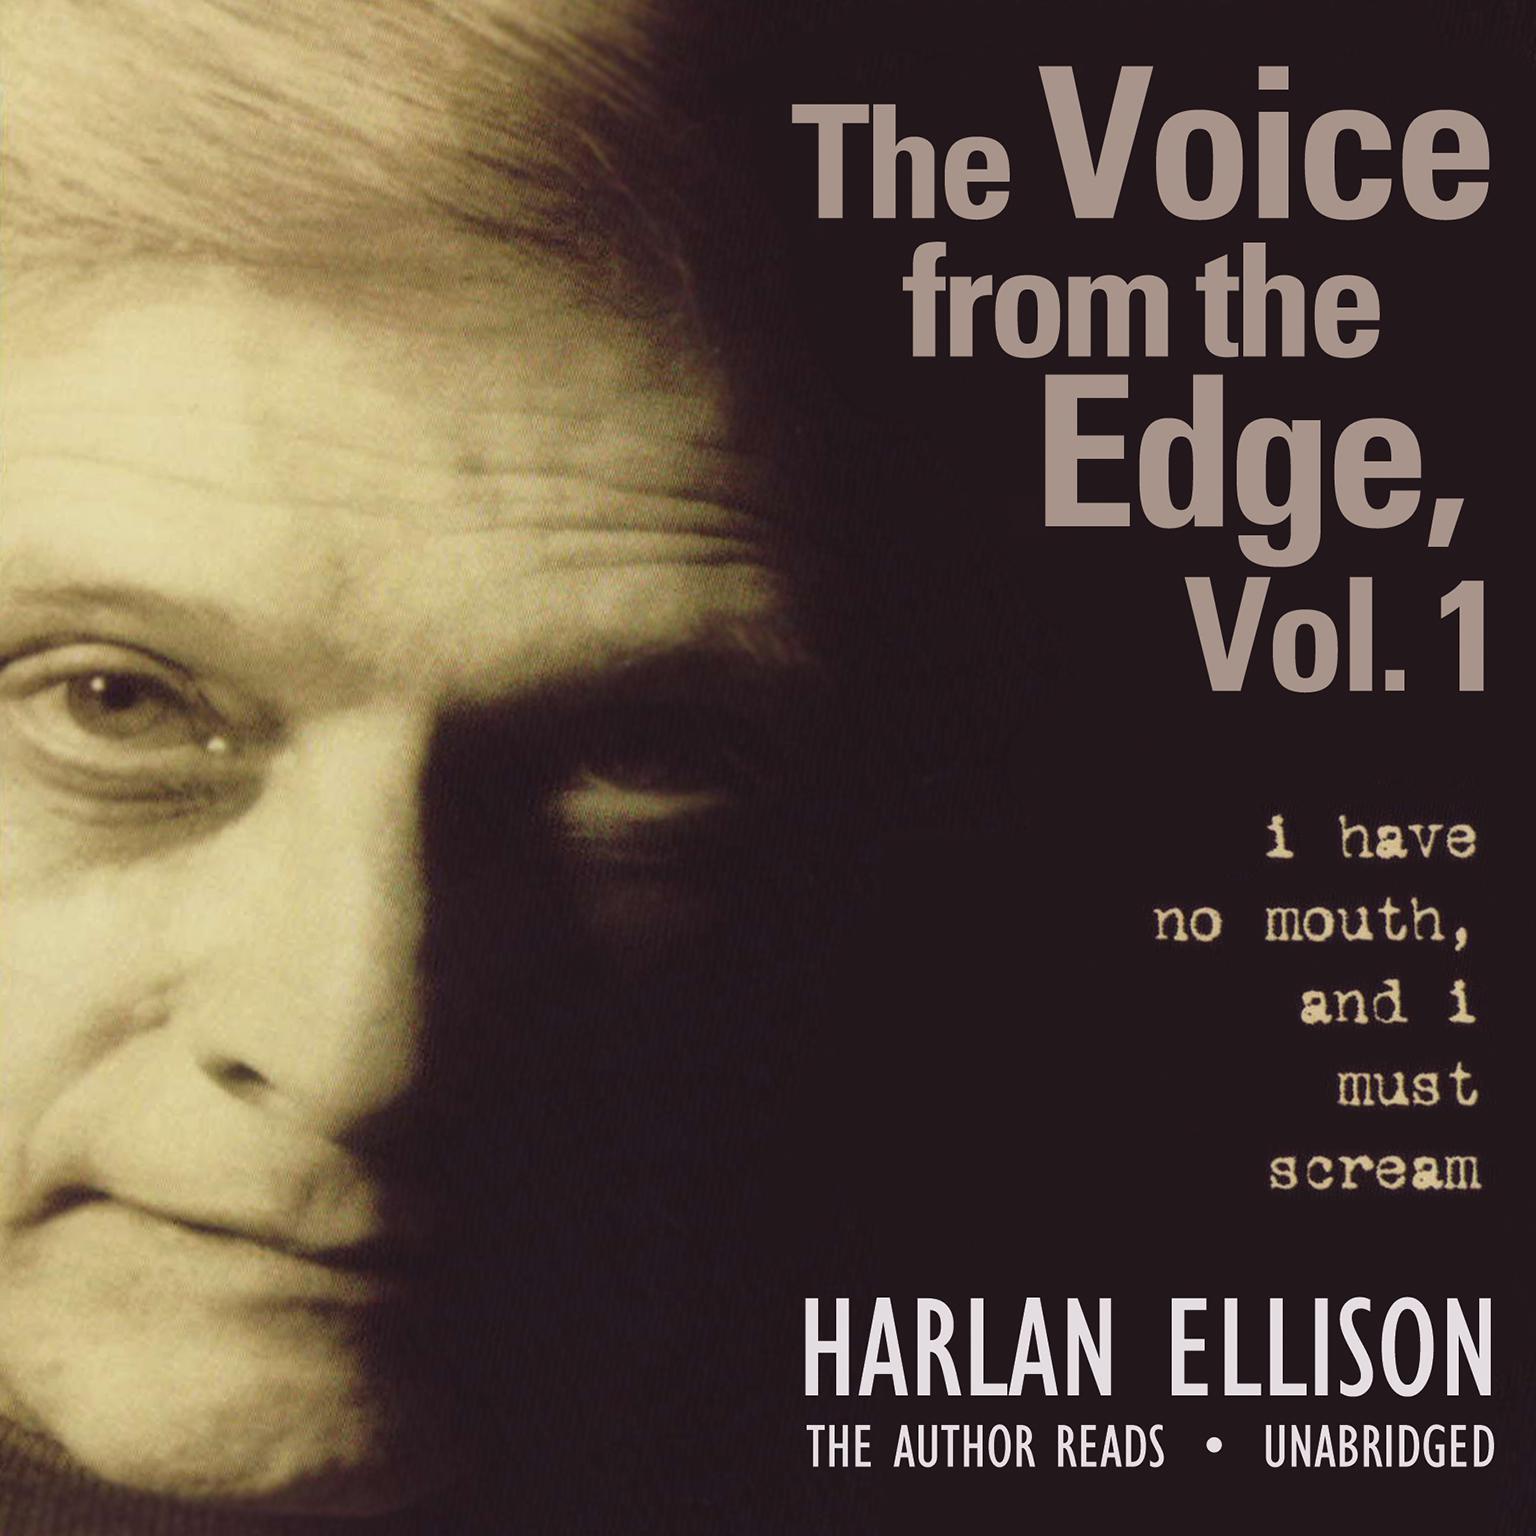 The Voice from the Edge, Vol. 1: I Have No Mouth, and I Must Scream Audiobook, by Harlan Ellison